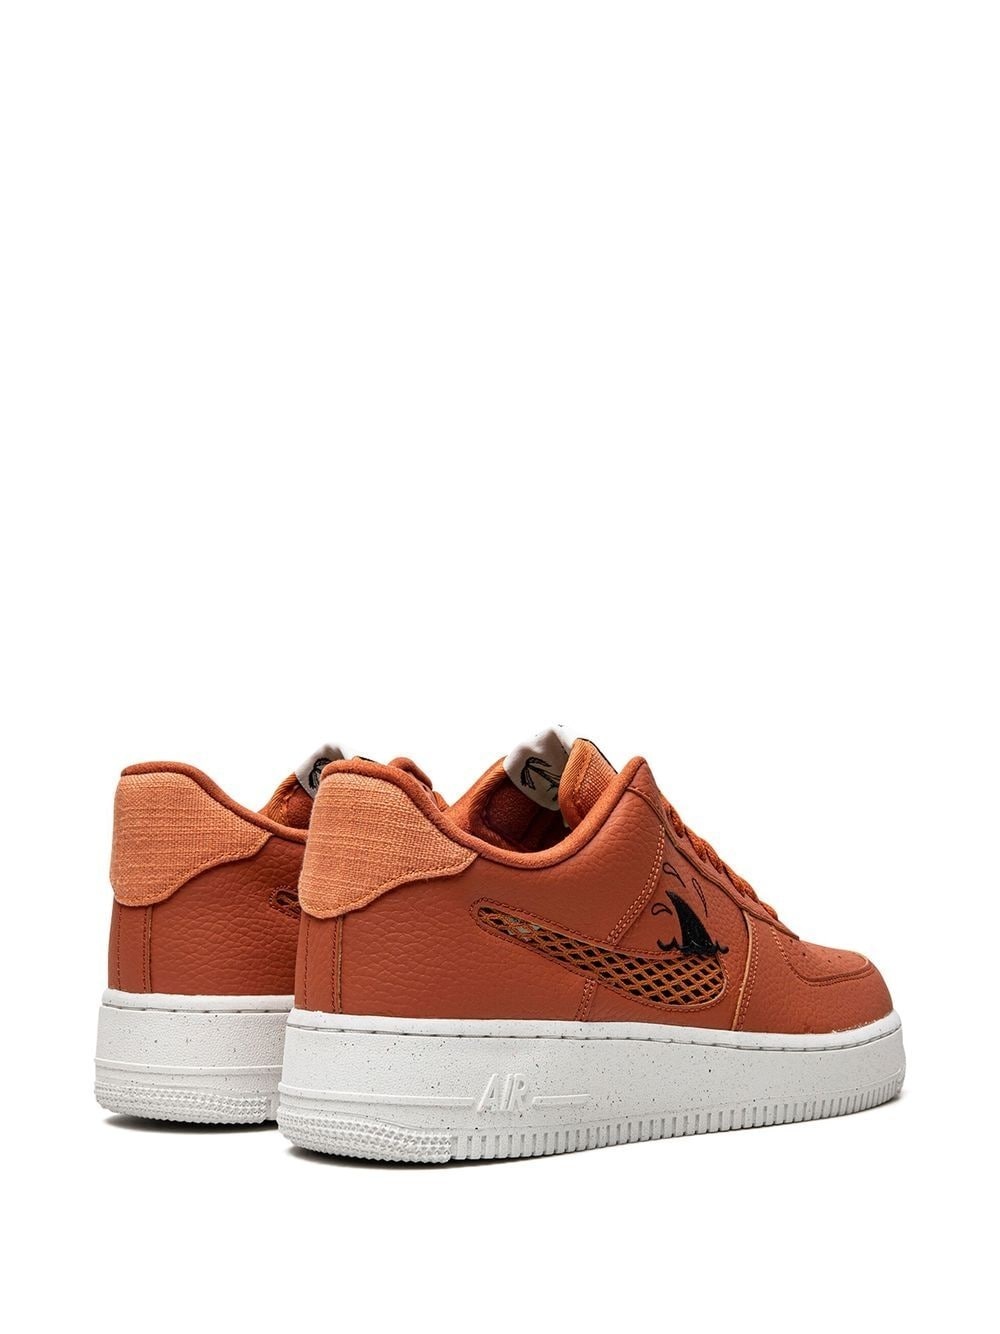 Air Force 1 '07 LV8 Next Nature "Sun Club" sneakers - 3